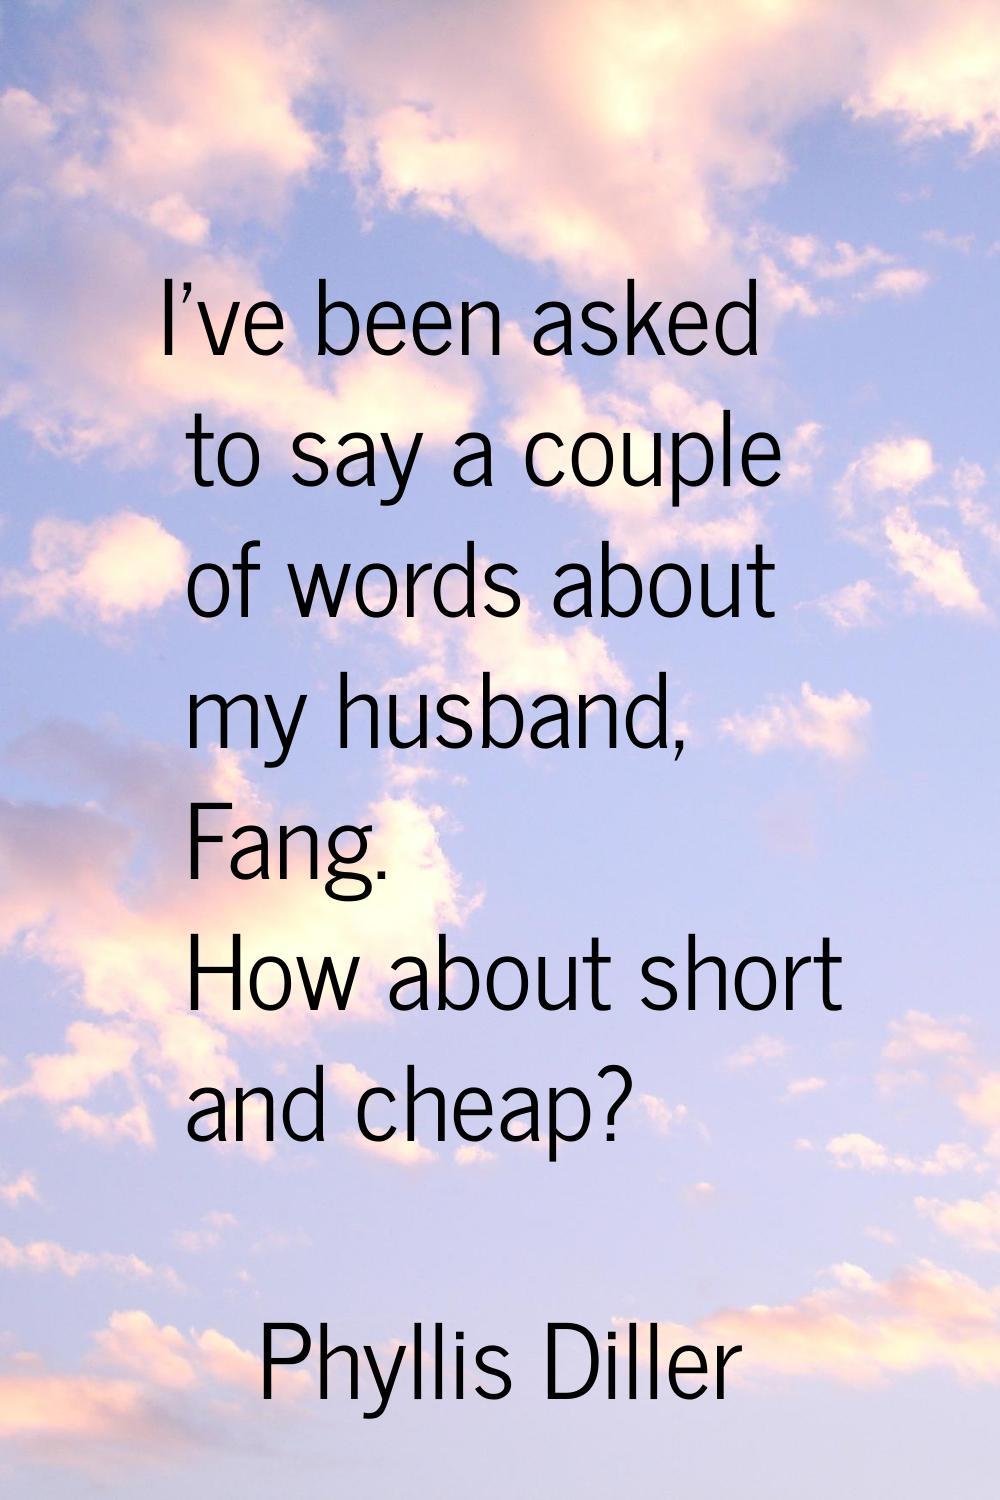 I've been asked to say a couple of words about my husband, Fang. How about short and cheap?